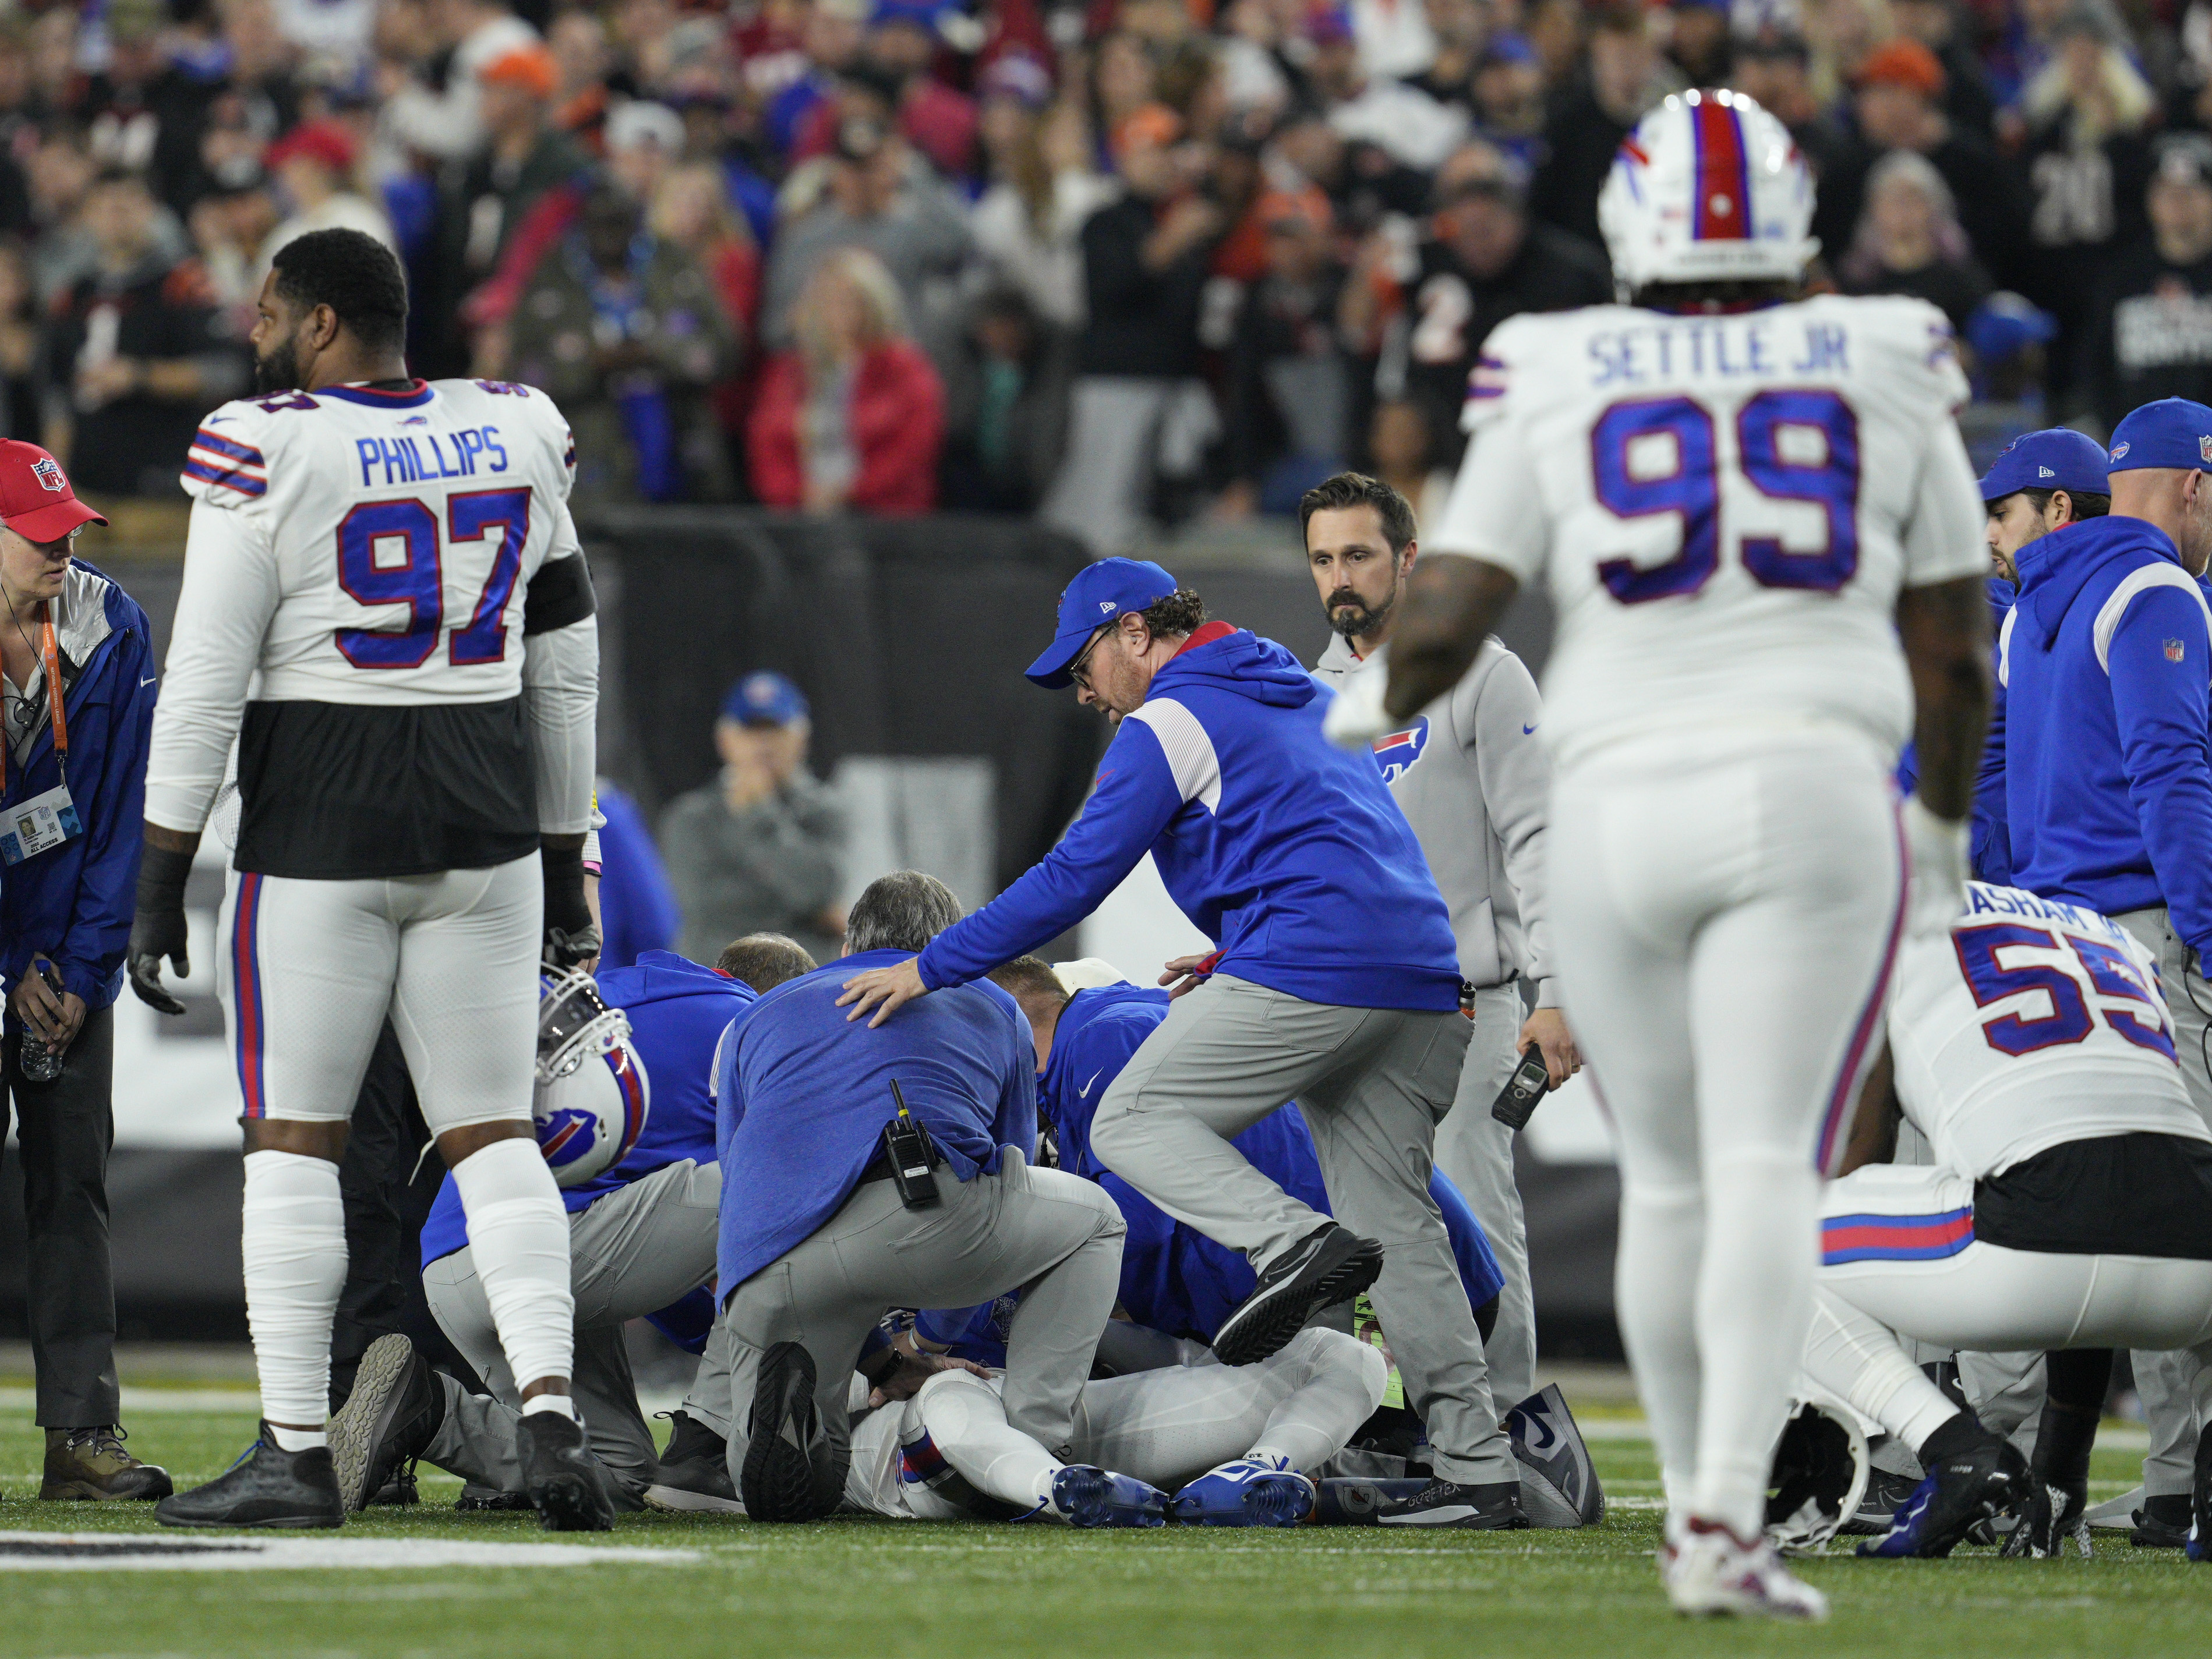 Buffalo Bills player Damar Hamlin is in critical condition after collapsing  in a game - OPB